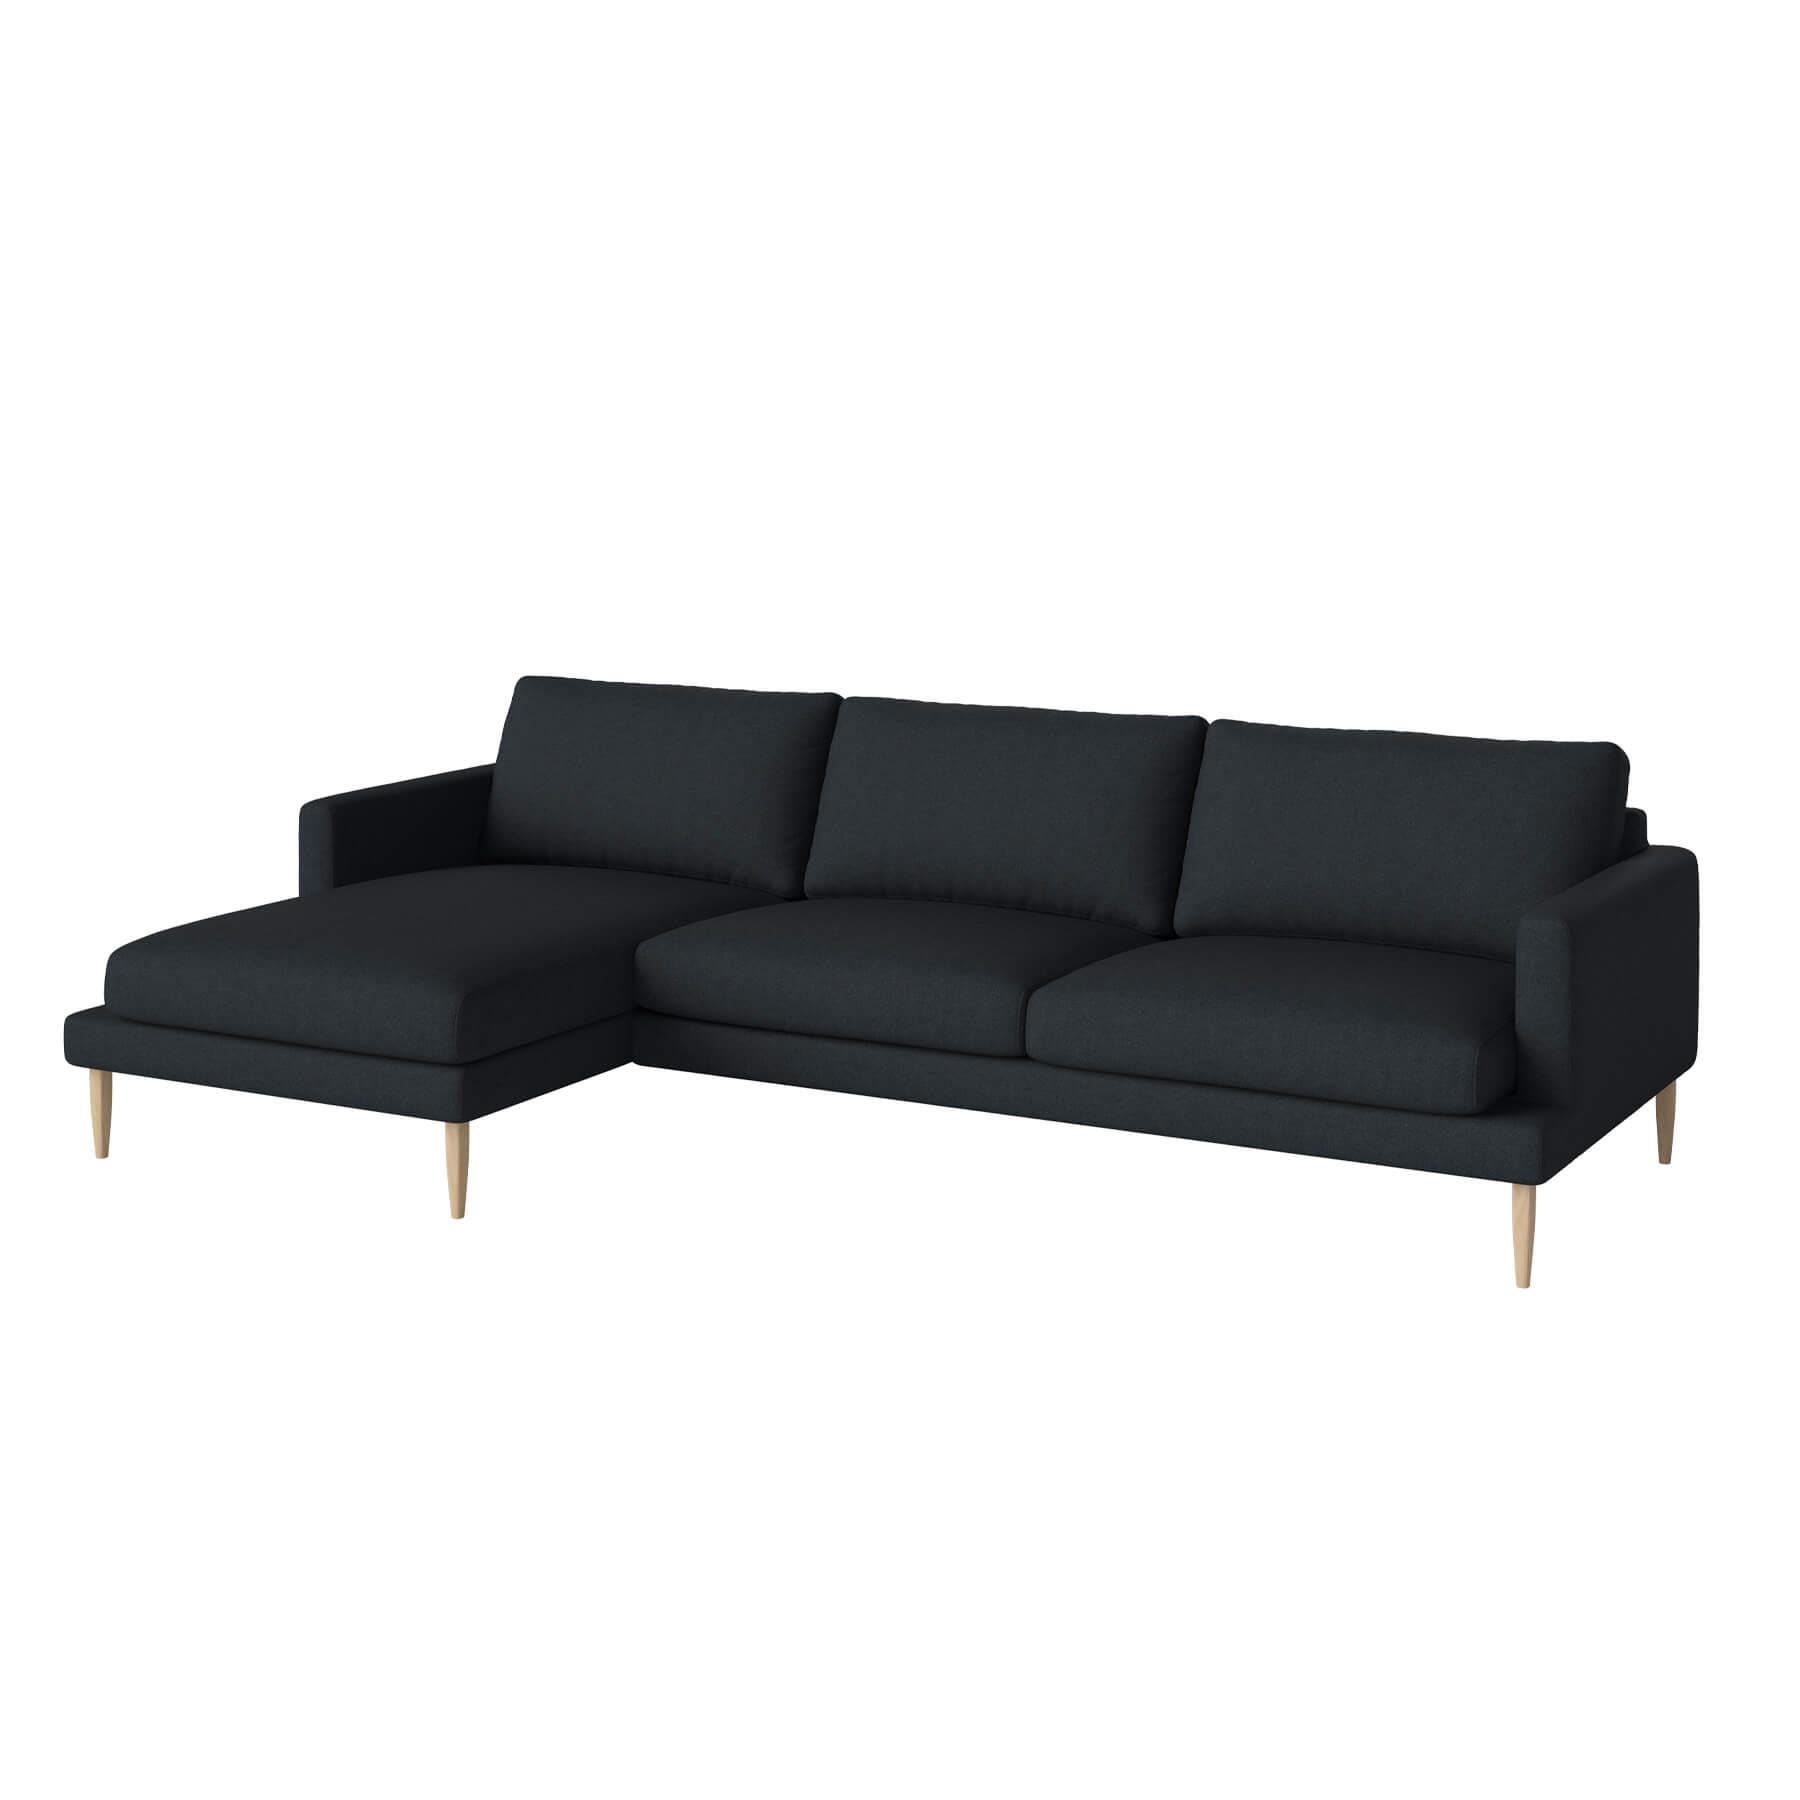 Bolia Veneda Sofa 35 Seater Sofa With Chaise Longue White Oiled Oak Qual Navy Left Blue Designer Furniture From Holloways Of Ludlow